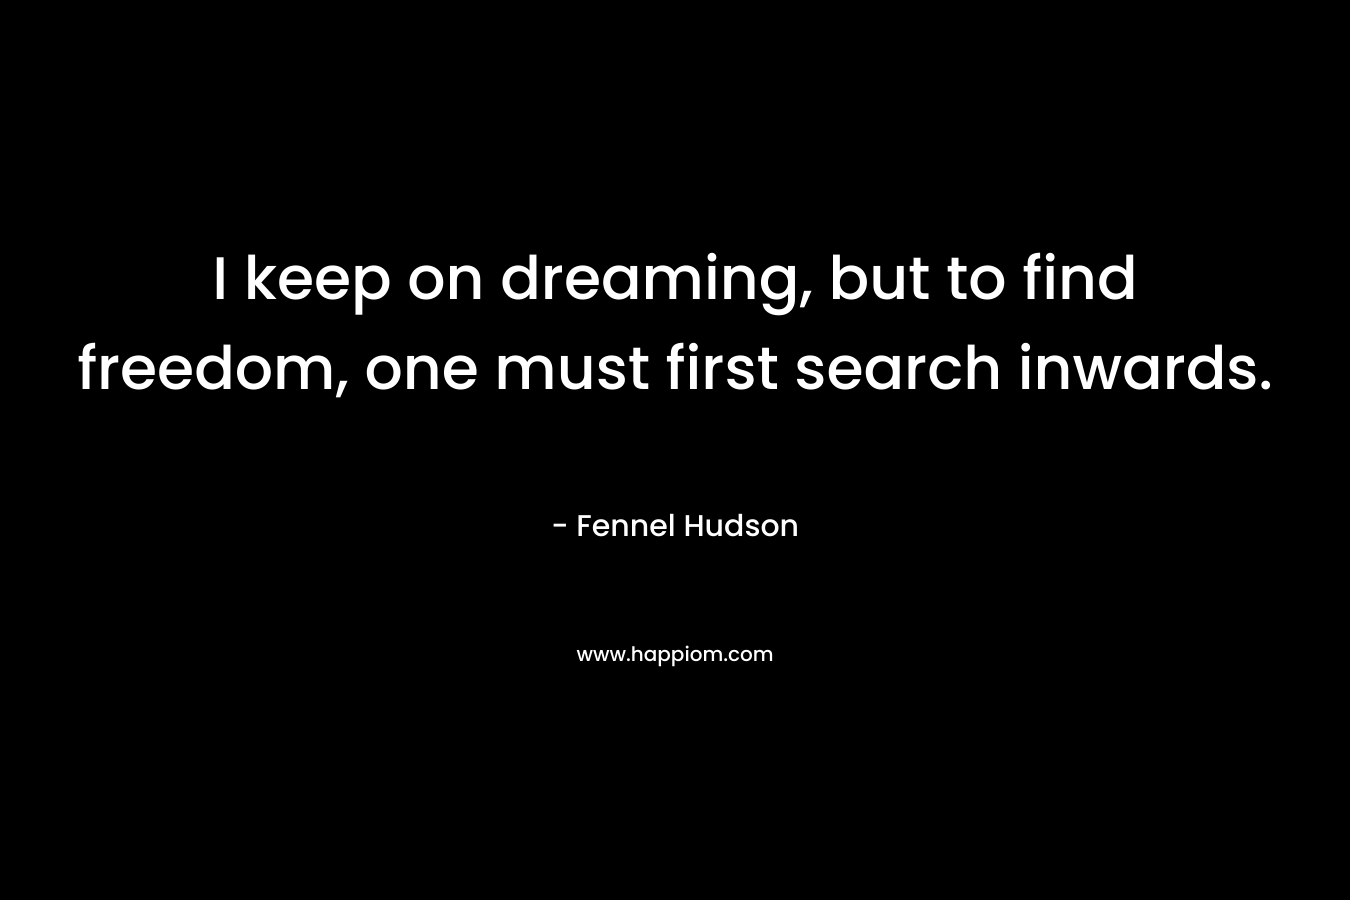 I keep on dreaming, but to find freedom, one must first search inwards.